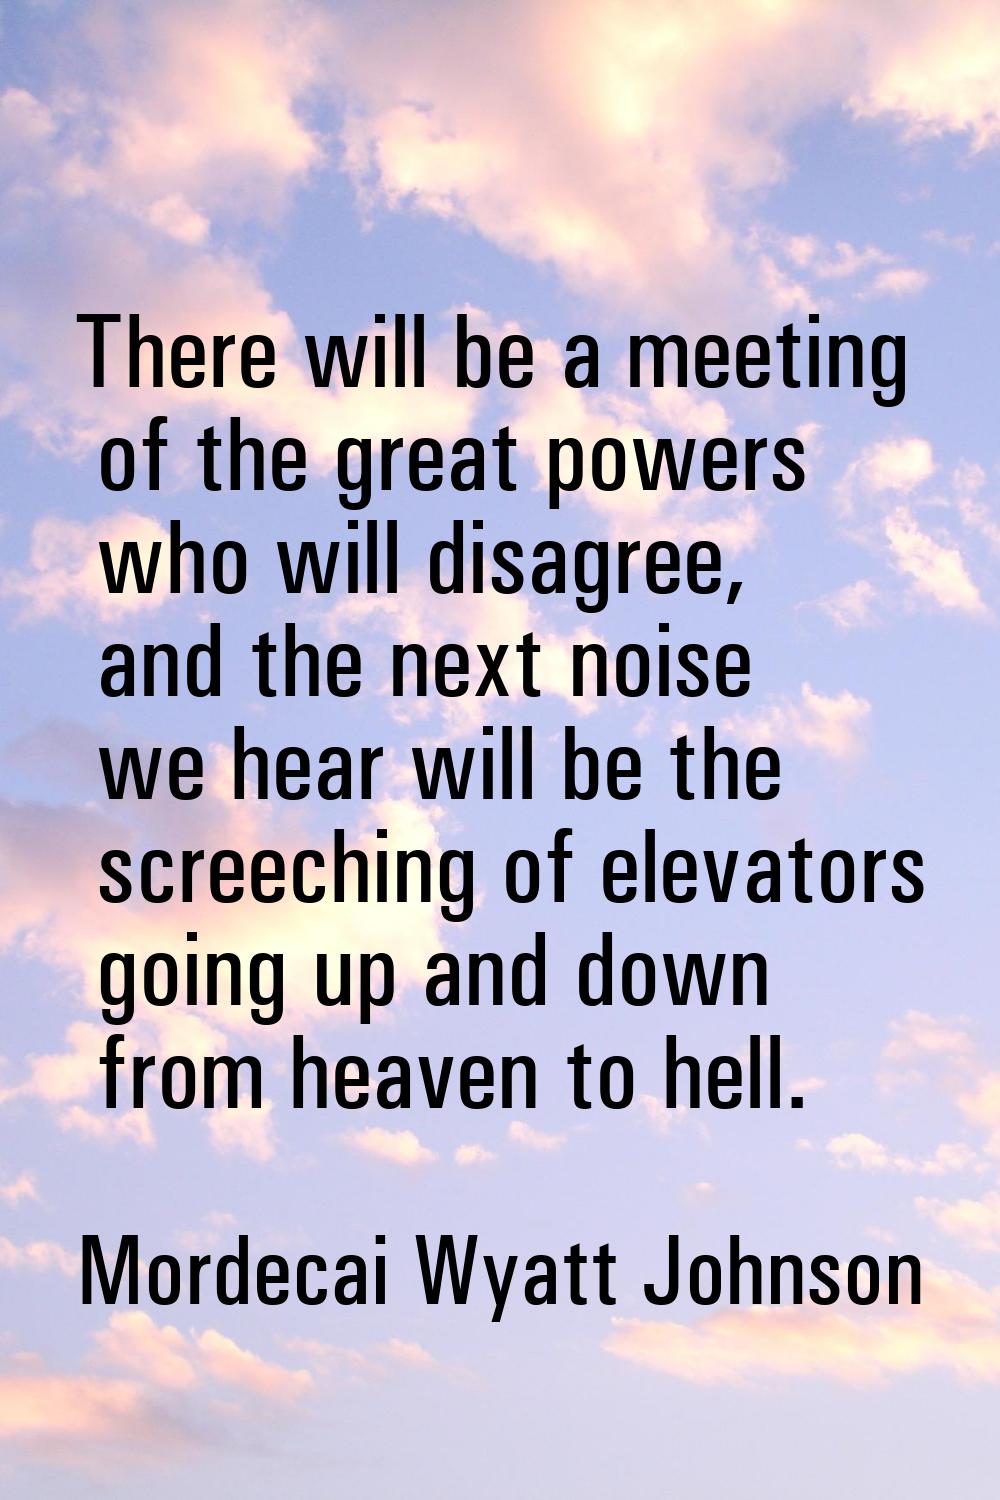 There will be a meeting of the great powers who will disagree, and the next noise we hear will be t